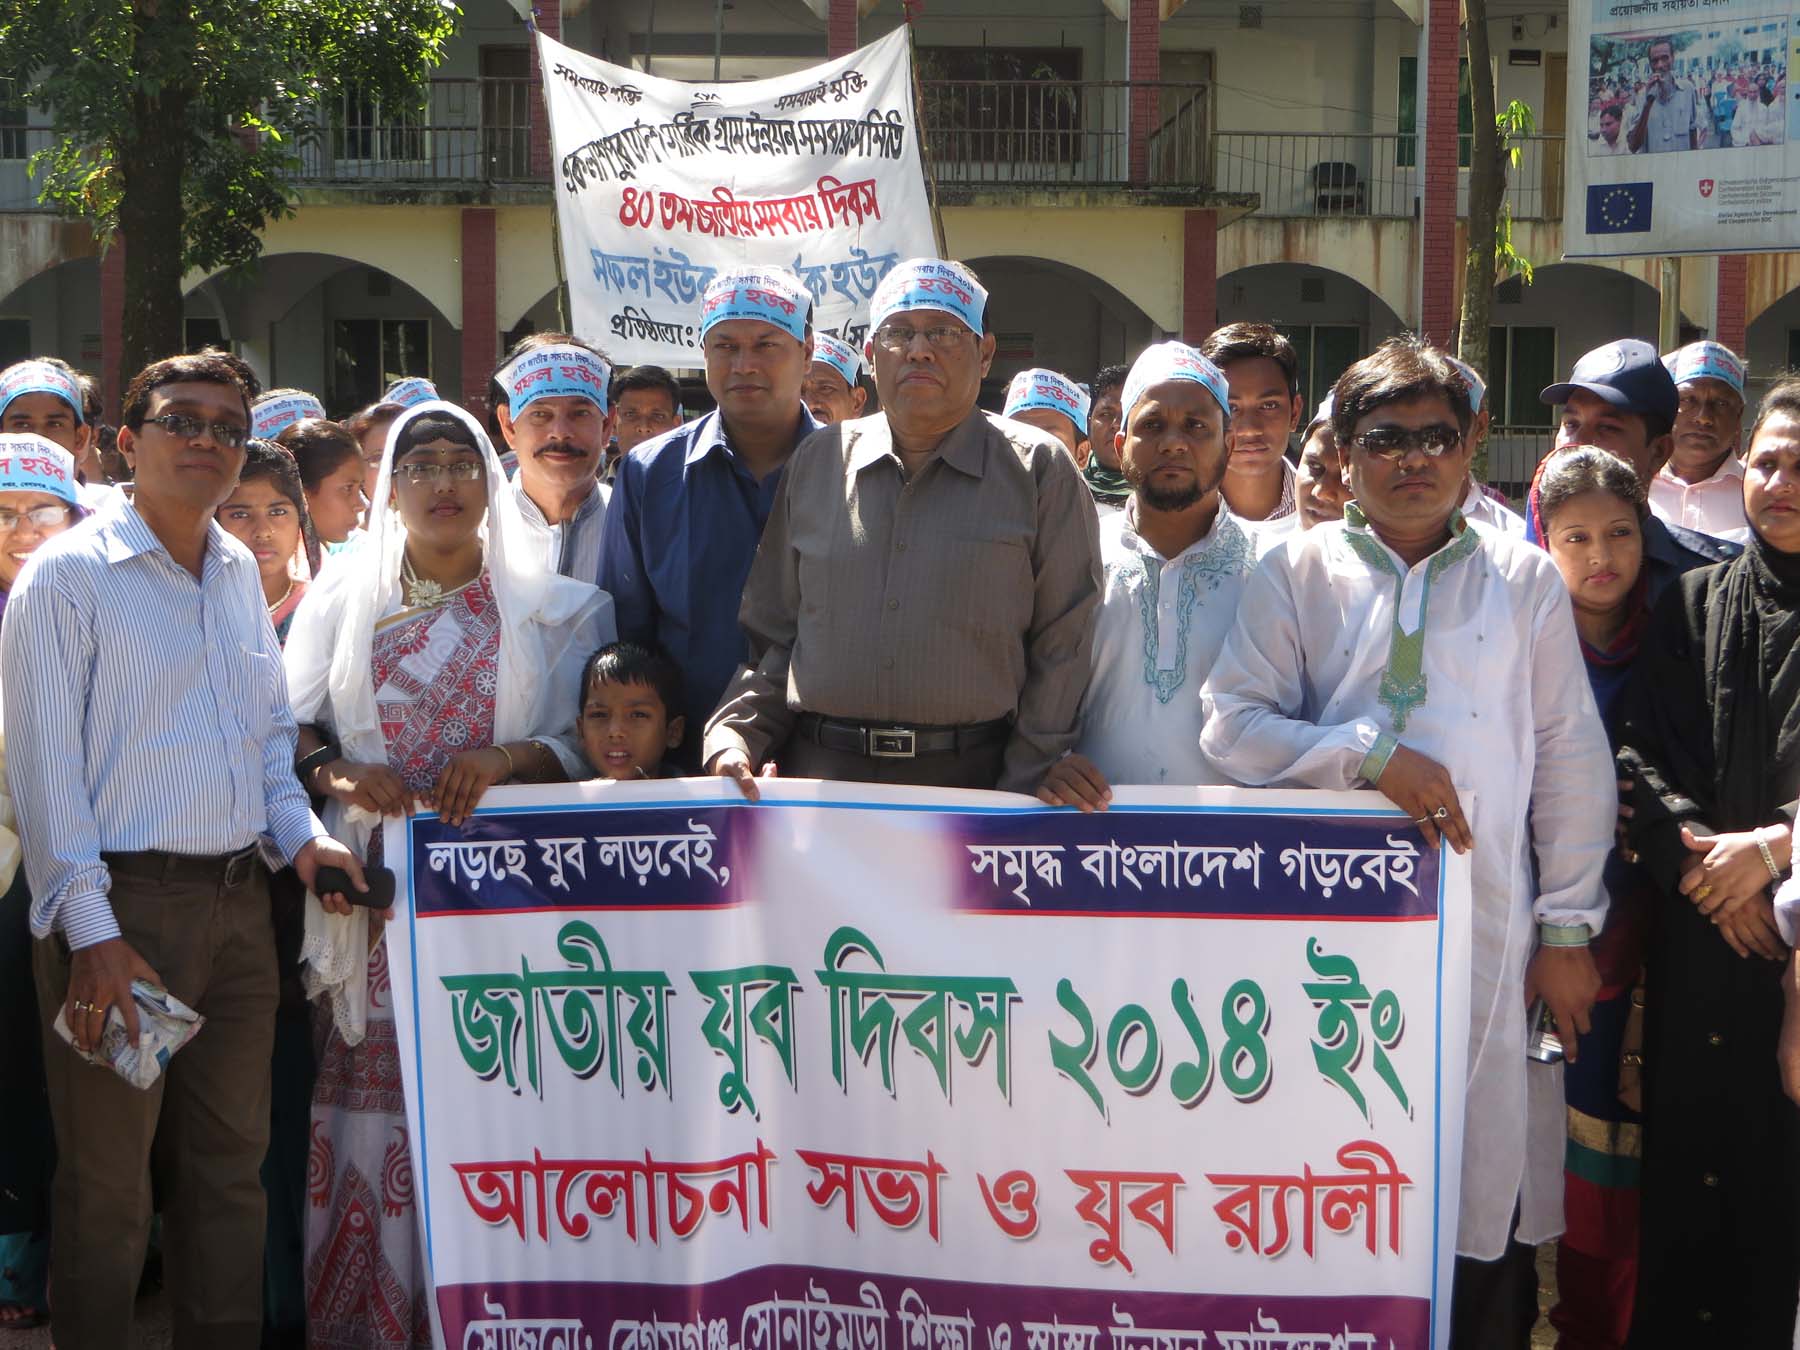 In the picture- Chairman of Begamganj-Sonaimuri Shikkha O Sastha Unnayan Foundation and Begumganj Technical and Computer Institute Principal Gias Uddin Mithu attended the discussion and rally on the occasion of National Youth Day 2014. Upazilla Chairman Ad. Abdur Rahim, Upazilla Nirbahi Officer, Youth Development Officer, Upazilla Vice Chairman, Woman Vice Chairman were present